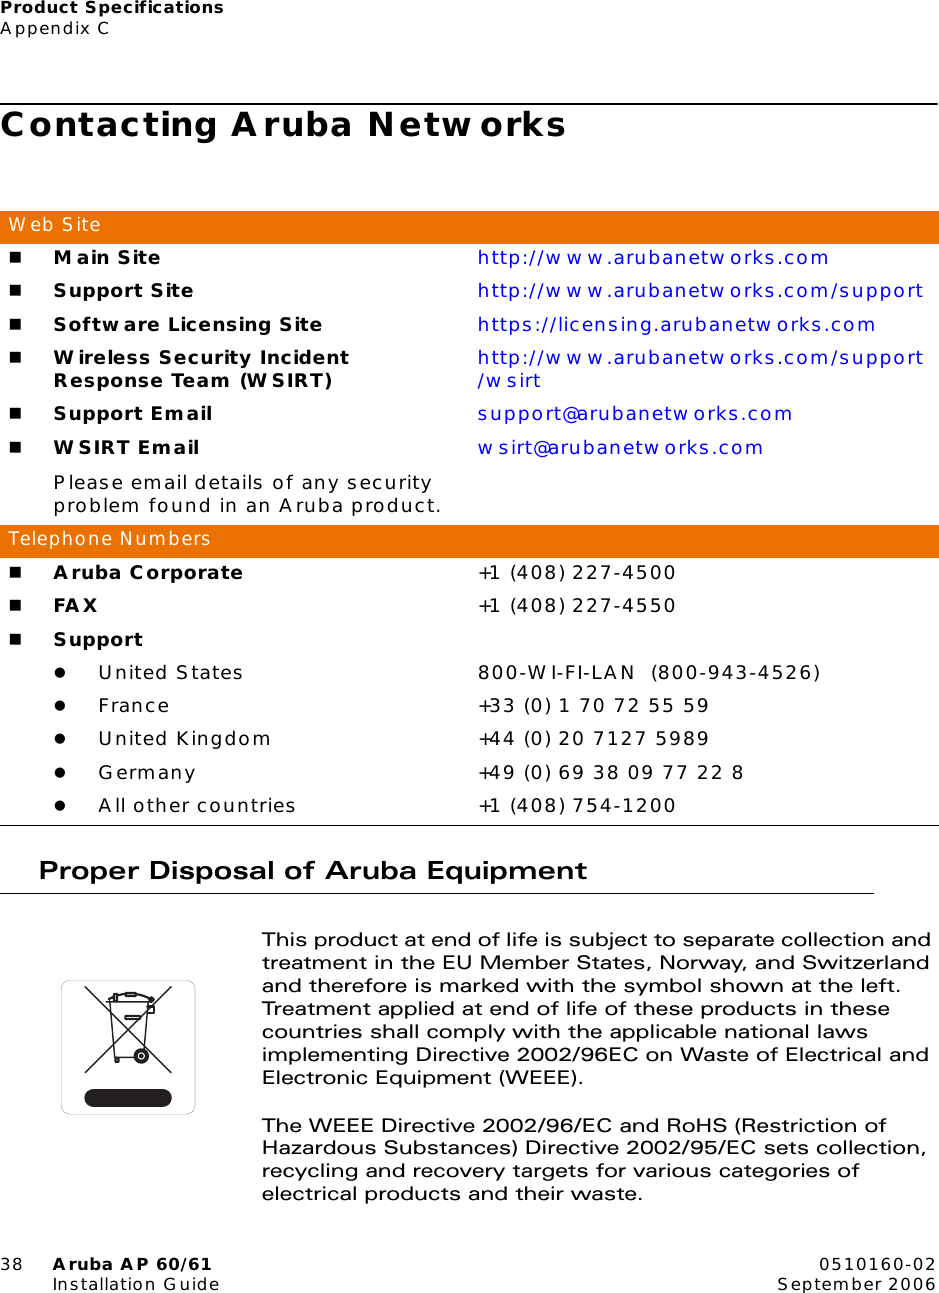 Product SpecificationsAppendix C38 Aruba AP 60/61 0510160-02Installation Guide September 2006Contacting Aruba NetworksProper Disposal of Aruba EquipmentThis product at end of life is subject to separate collection and treatment in the EU Member States, Norway, and Switzerland and therefore is marked with the symbol shown at the left. Treatment applied at end of life of these products in these countries shall comply with the applicable national laws implementing Directive 2002/96EC on Waste of Electrical and Electronic Equipment (WEEE).The WEEE Directive 2002/96/EC and RoHS (Restriction of Hazardous Substances) Directive 2002/95/EC sets collection, recycling and recovery targets for various categories of electrical products and their waste.Web SiteMain Site http://www.arubanetworks.comSupport Site http://www.arubanetworks.com/supportSoftware Licensing Site https://licensing.arubanetworks.comWireless Security Incident Response Team (WSIRT) http://www.arubanetworks.com/support/wsirtSupport Email support@arubanetworks.comWSIRT EmailPlease email details of any security problem found in an Aruba product.wsirt@arubanetworks.comTelephone NumbersAruba Corporate +1 (408) 227-4500FAX +1 (408) 227-4550SupportzUnited States 800-WI-FI-LAN (800-943-4526)zFrance +33 (0) 1 70 72 55 59zUnited Kingdom +44 (0) 20 7127 5989zGermany +49 (0) 69 38 09 77 22 8zAll other countries +1 (408) 754-1200